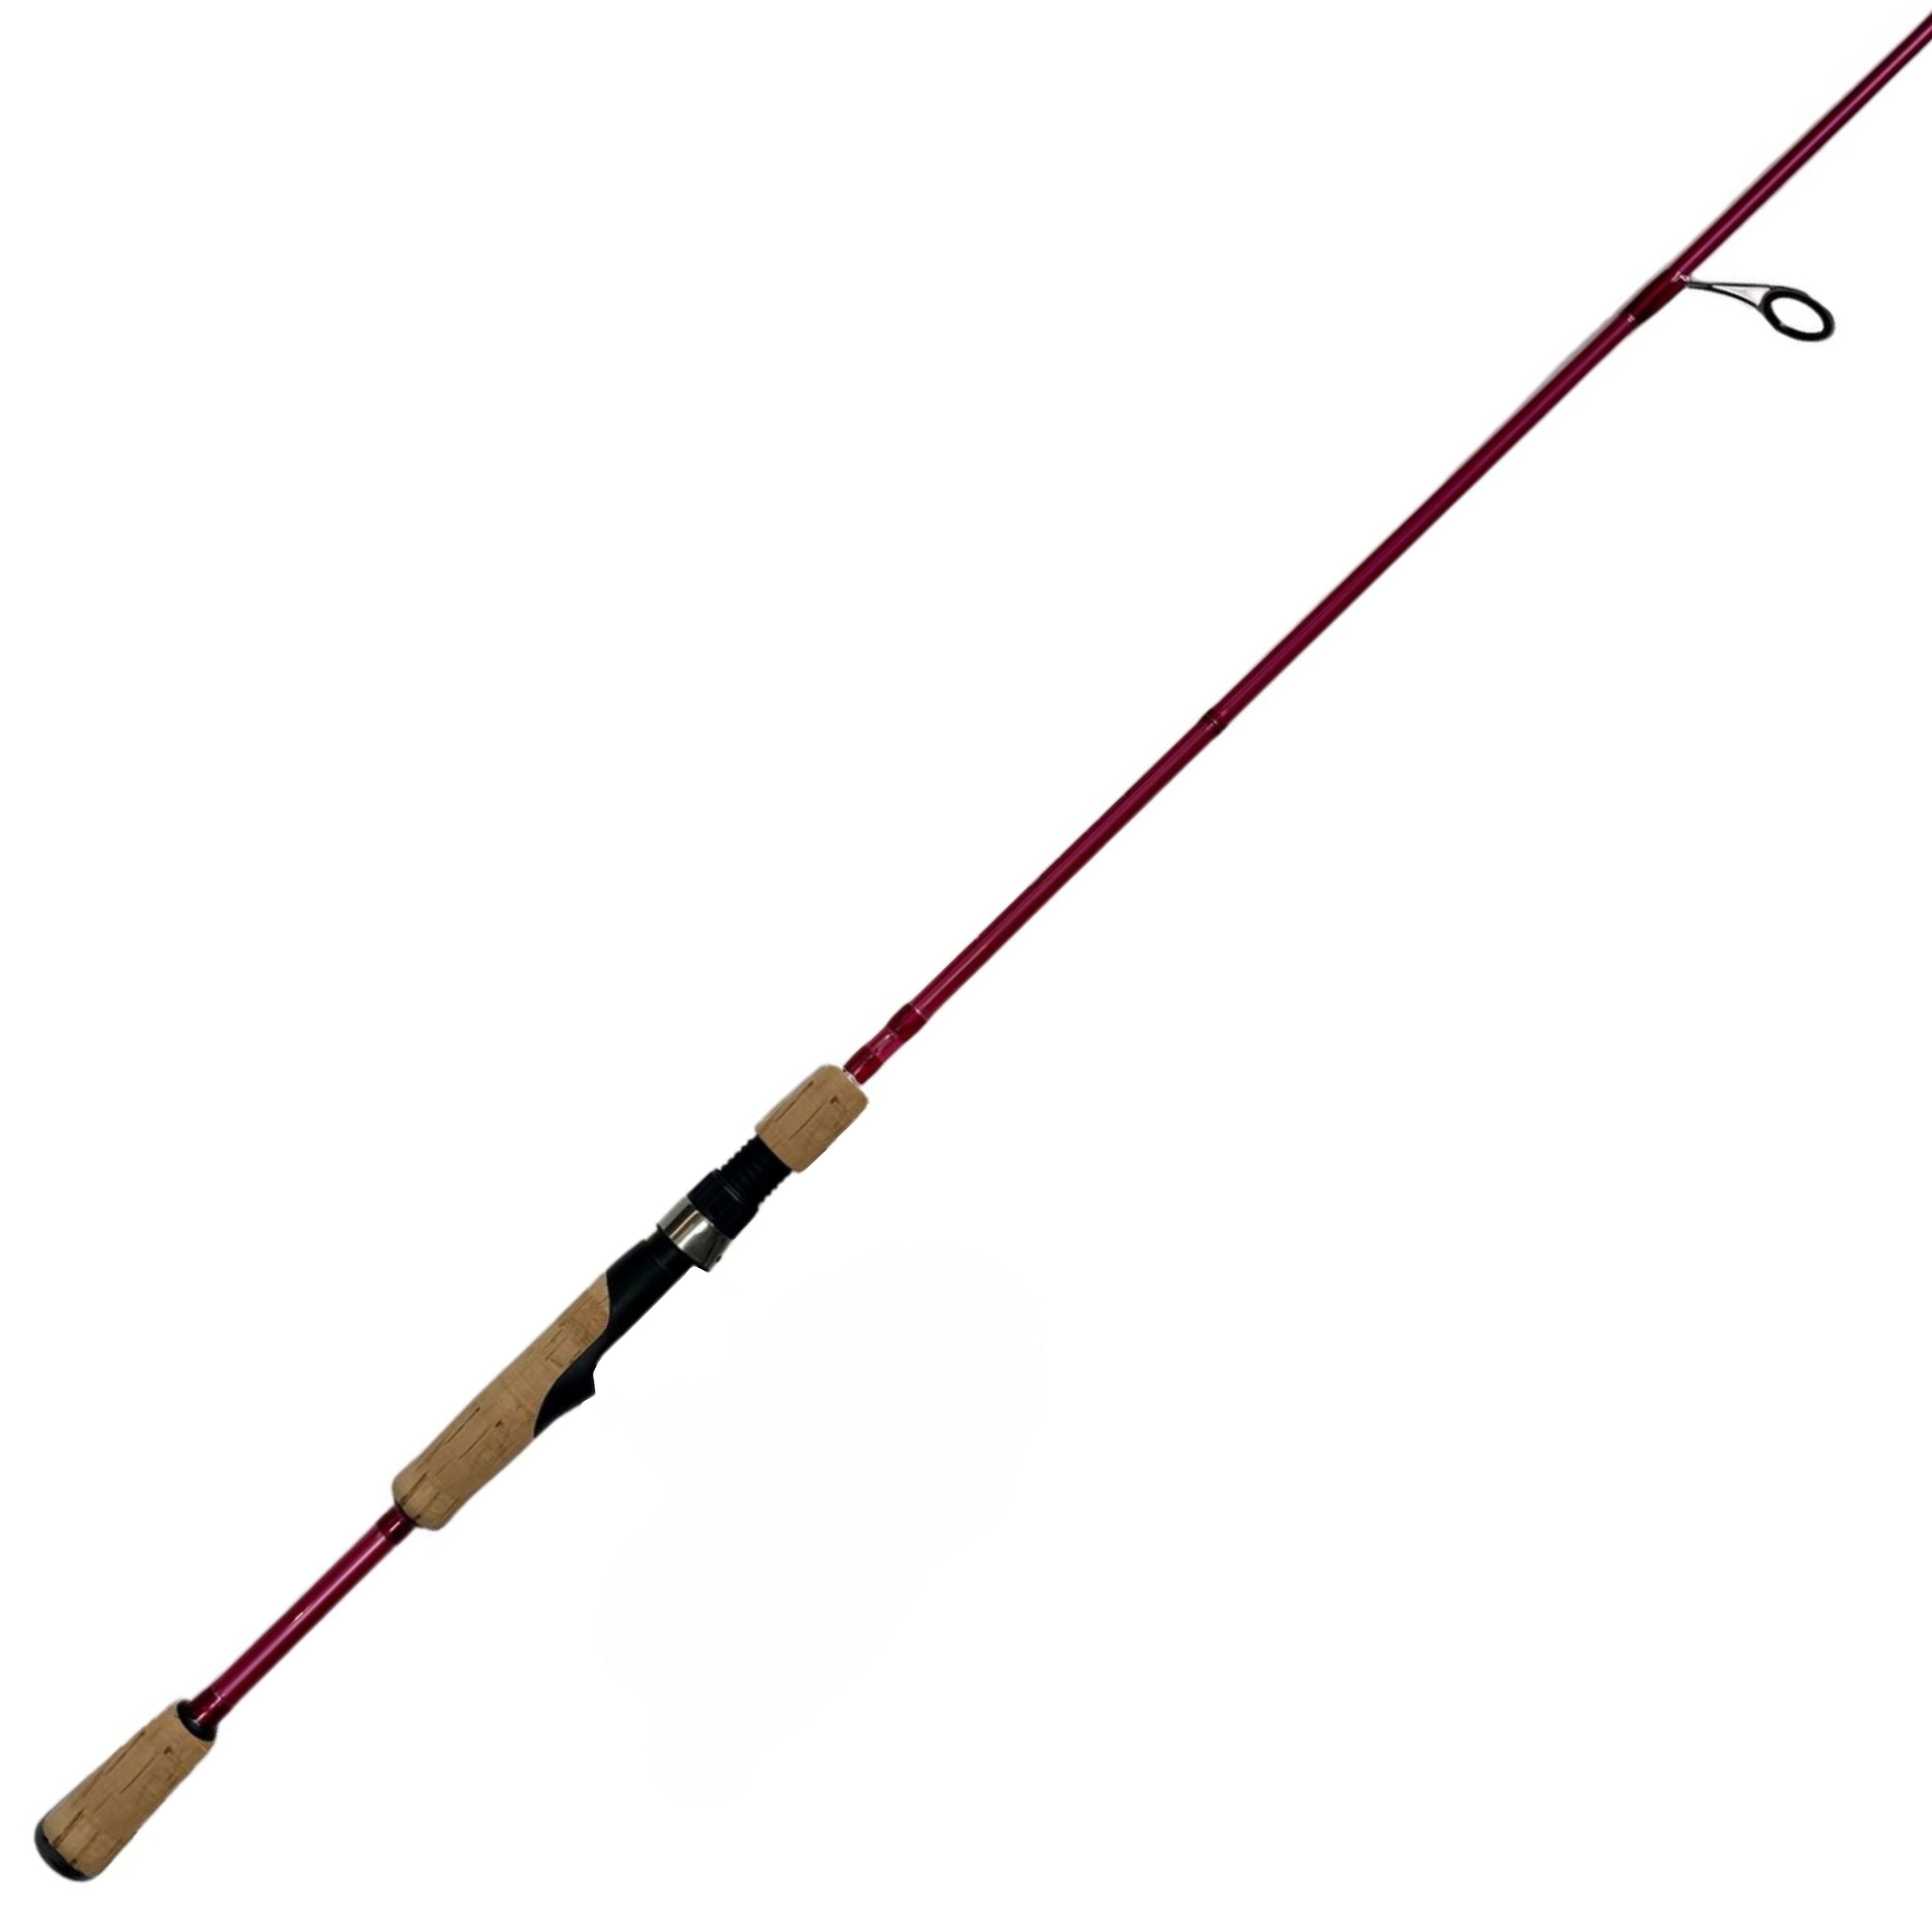 "Outback Ladies" Spinning rod